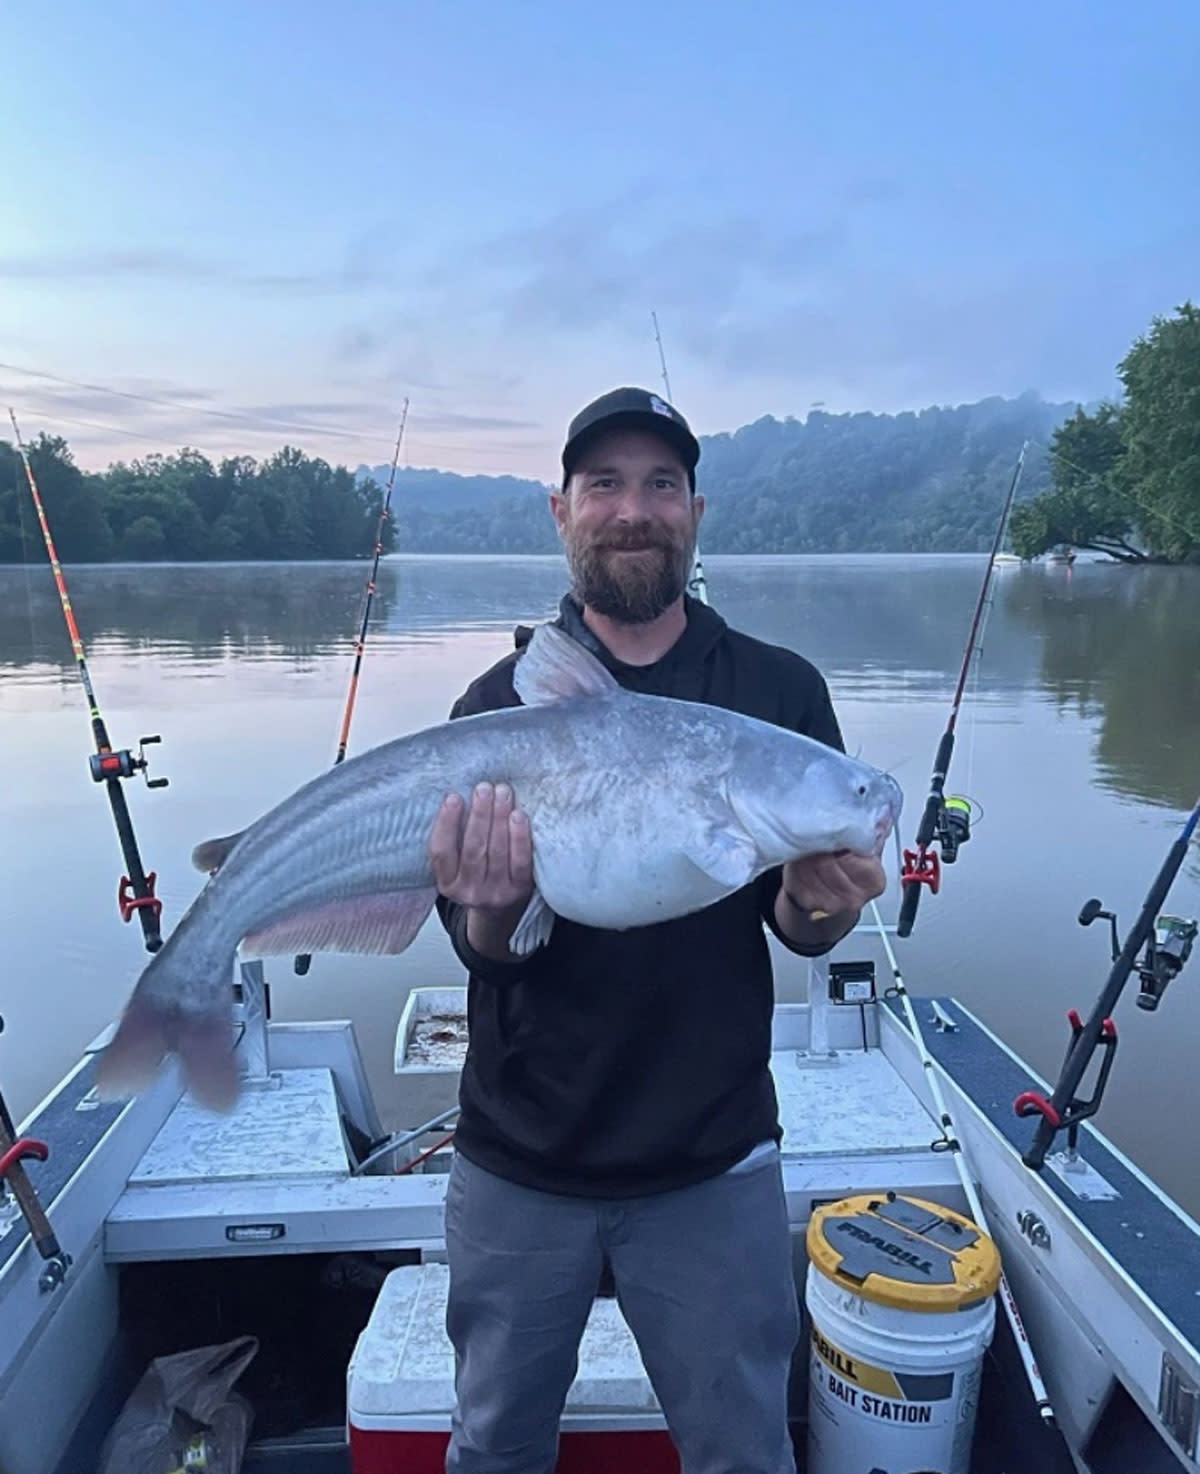 The two men were out fishing on the Ohio River when they caught the catfish with an unusually big stomach. Source: Fox 59